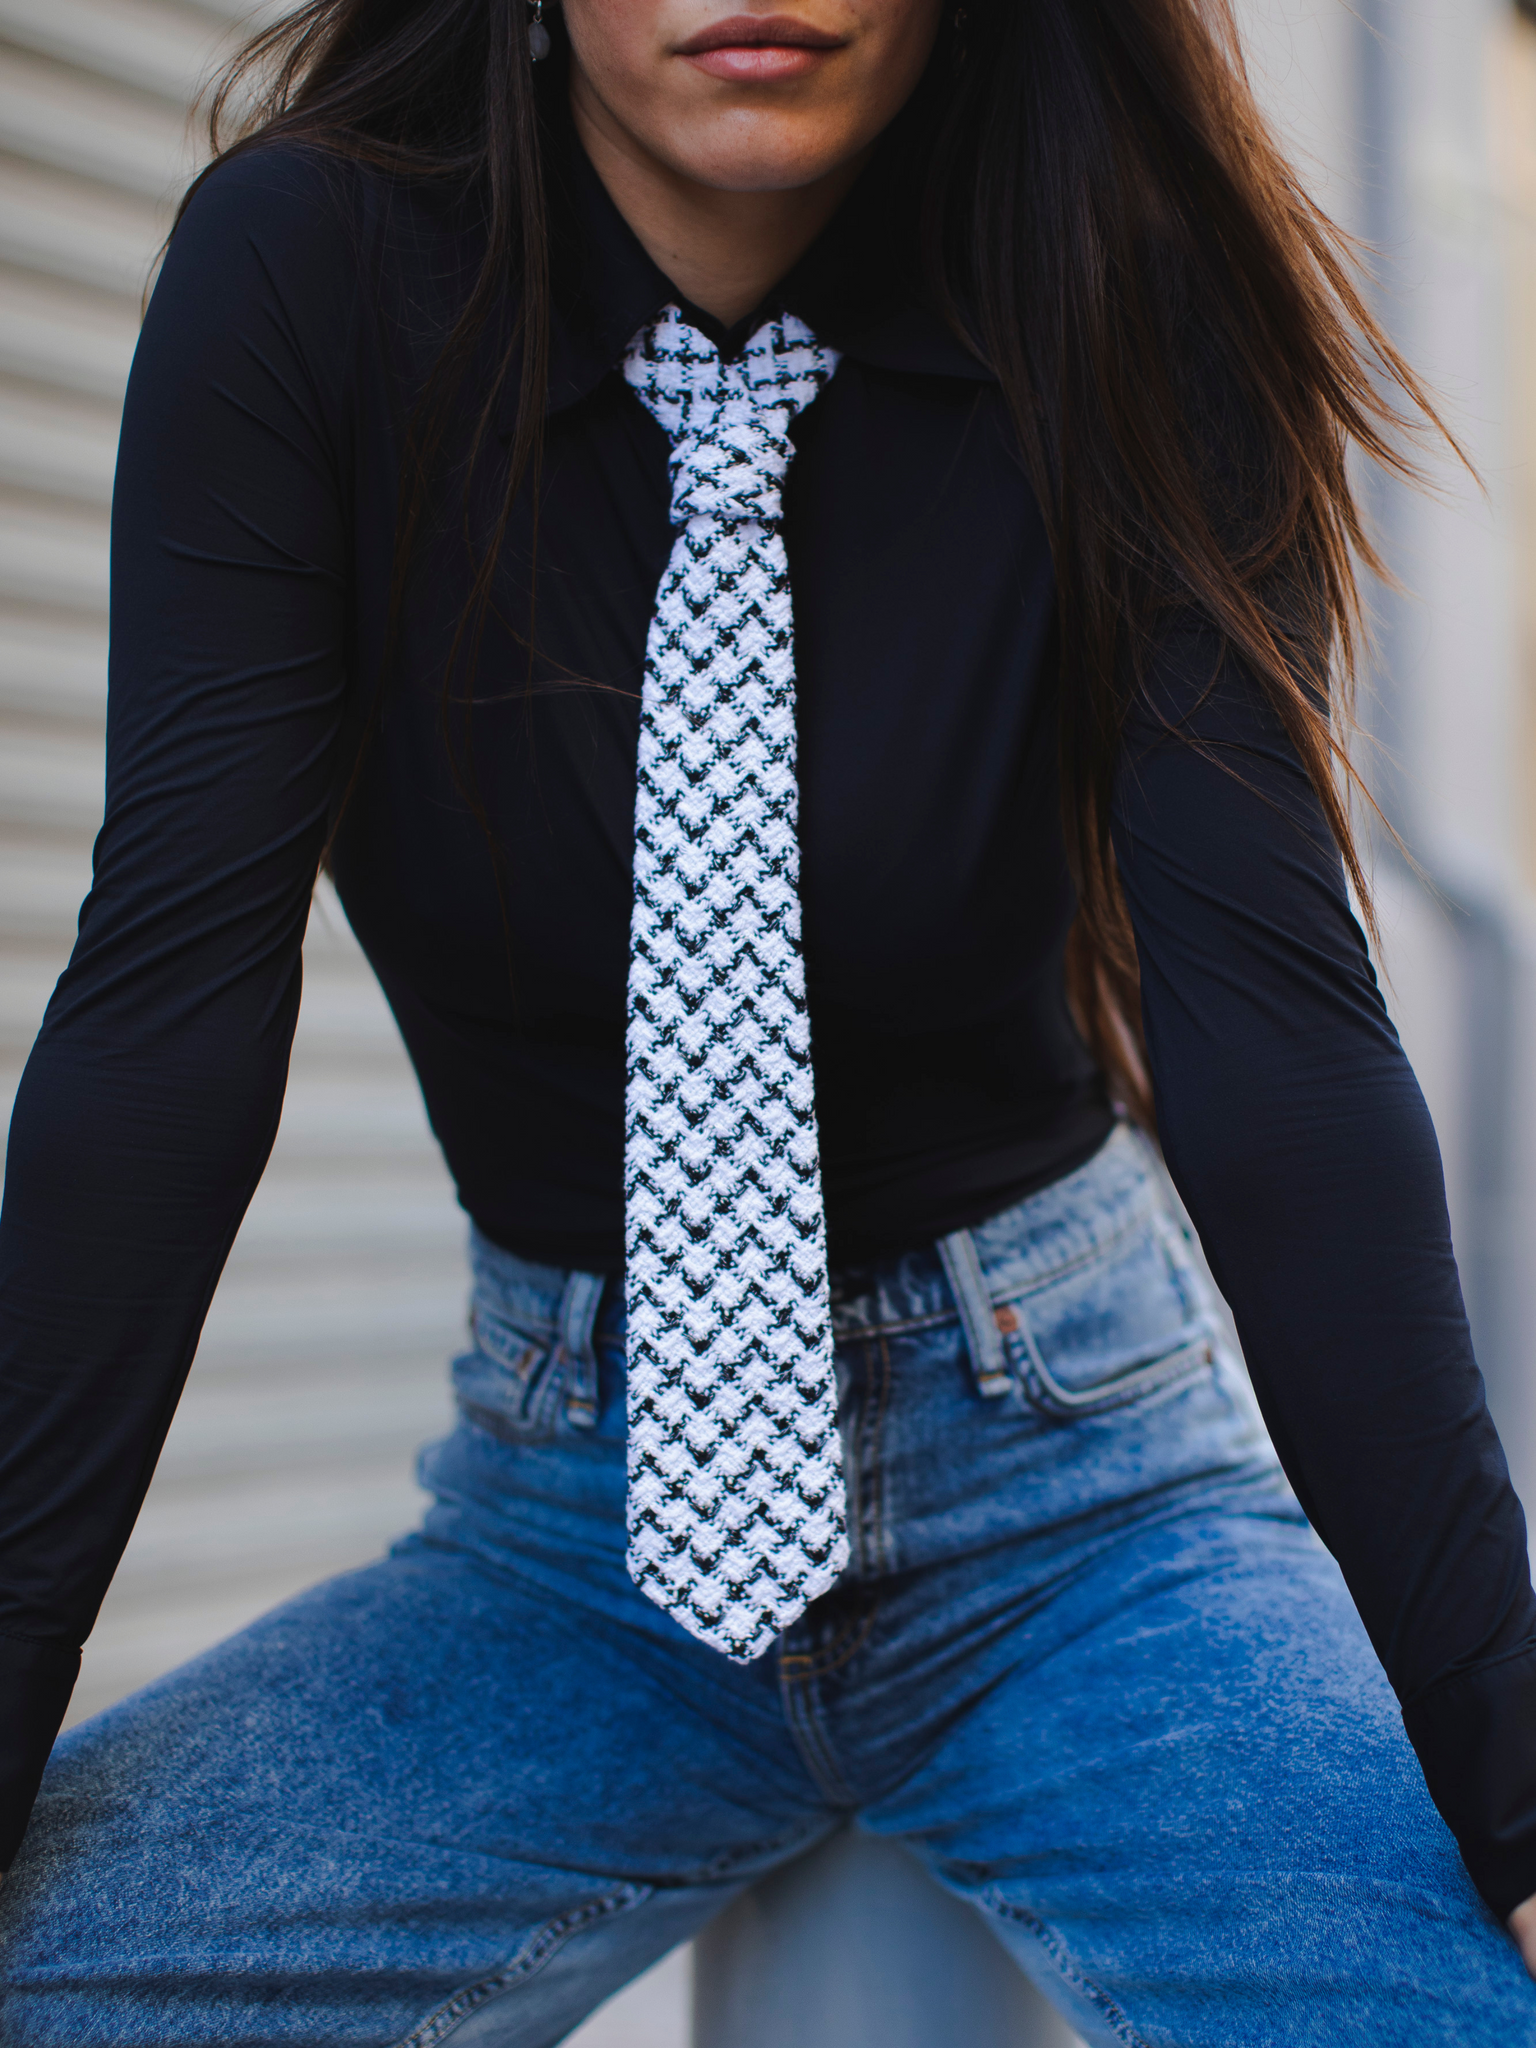 The Textured Houndstooth Classic